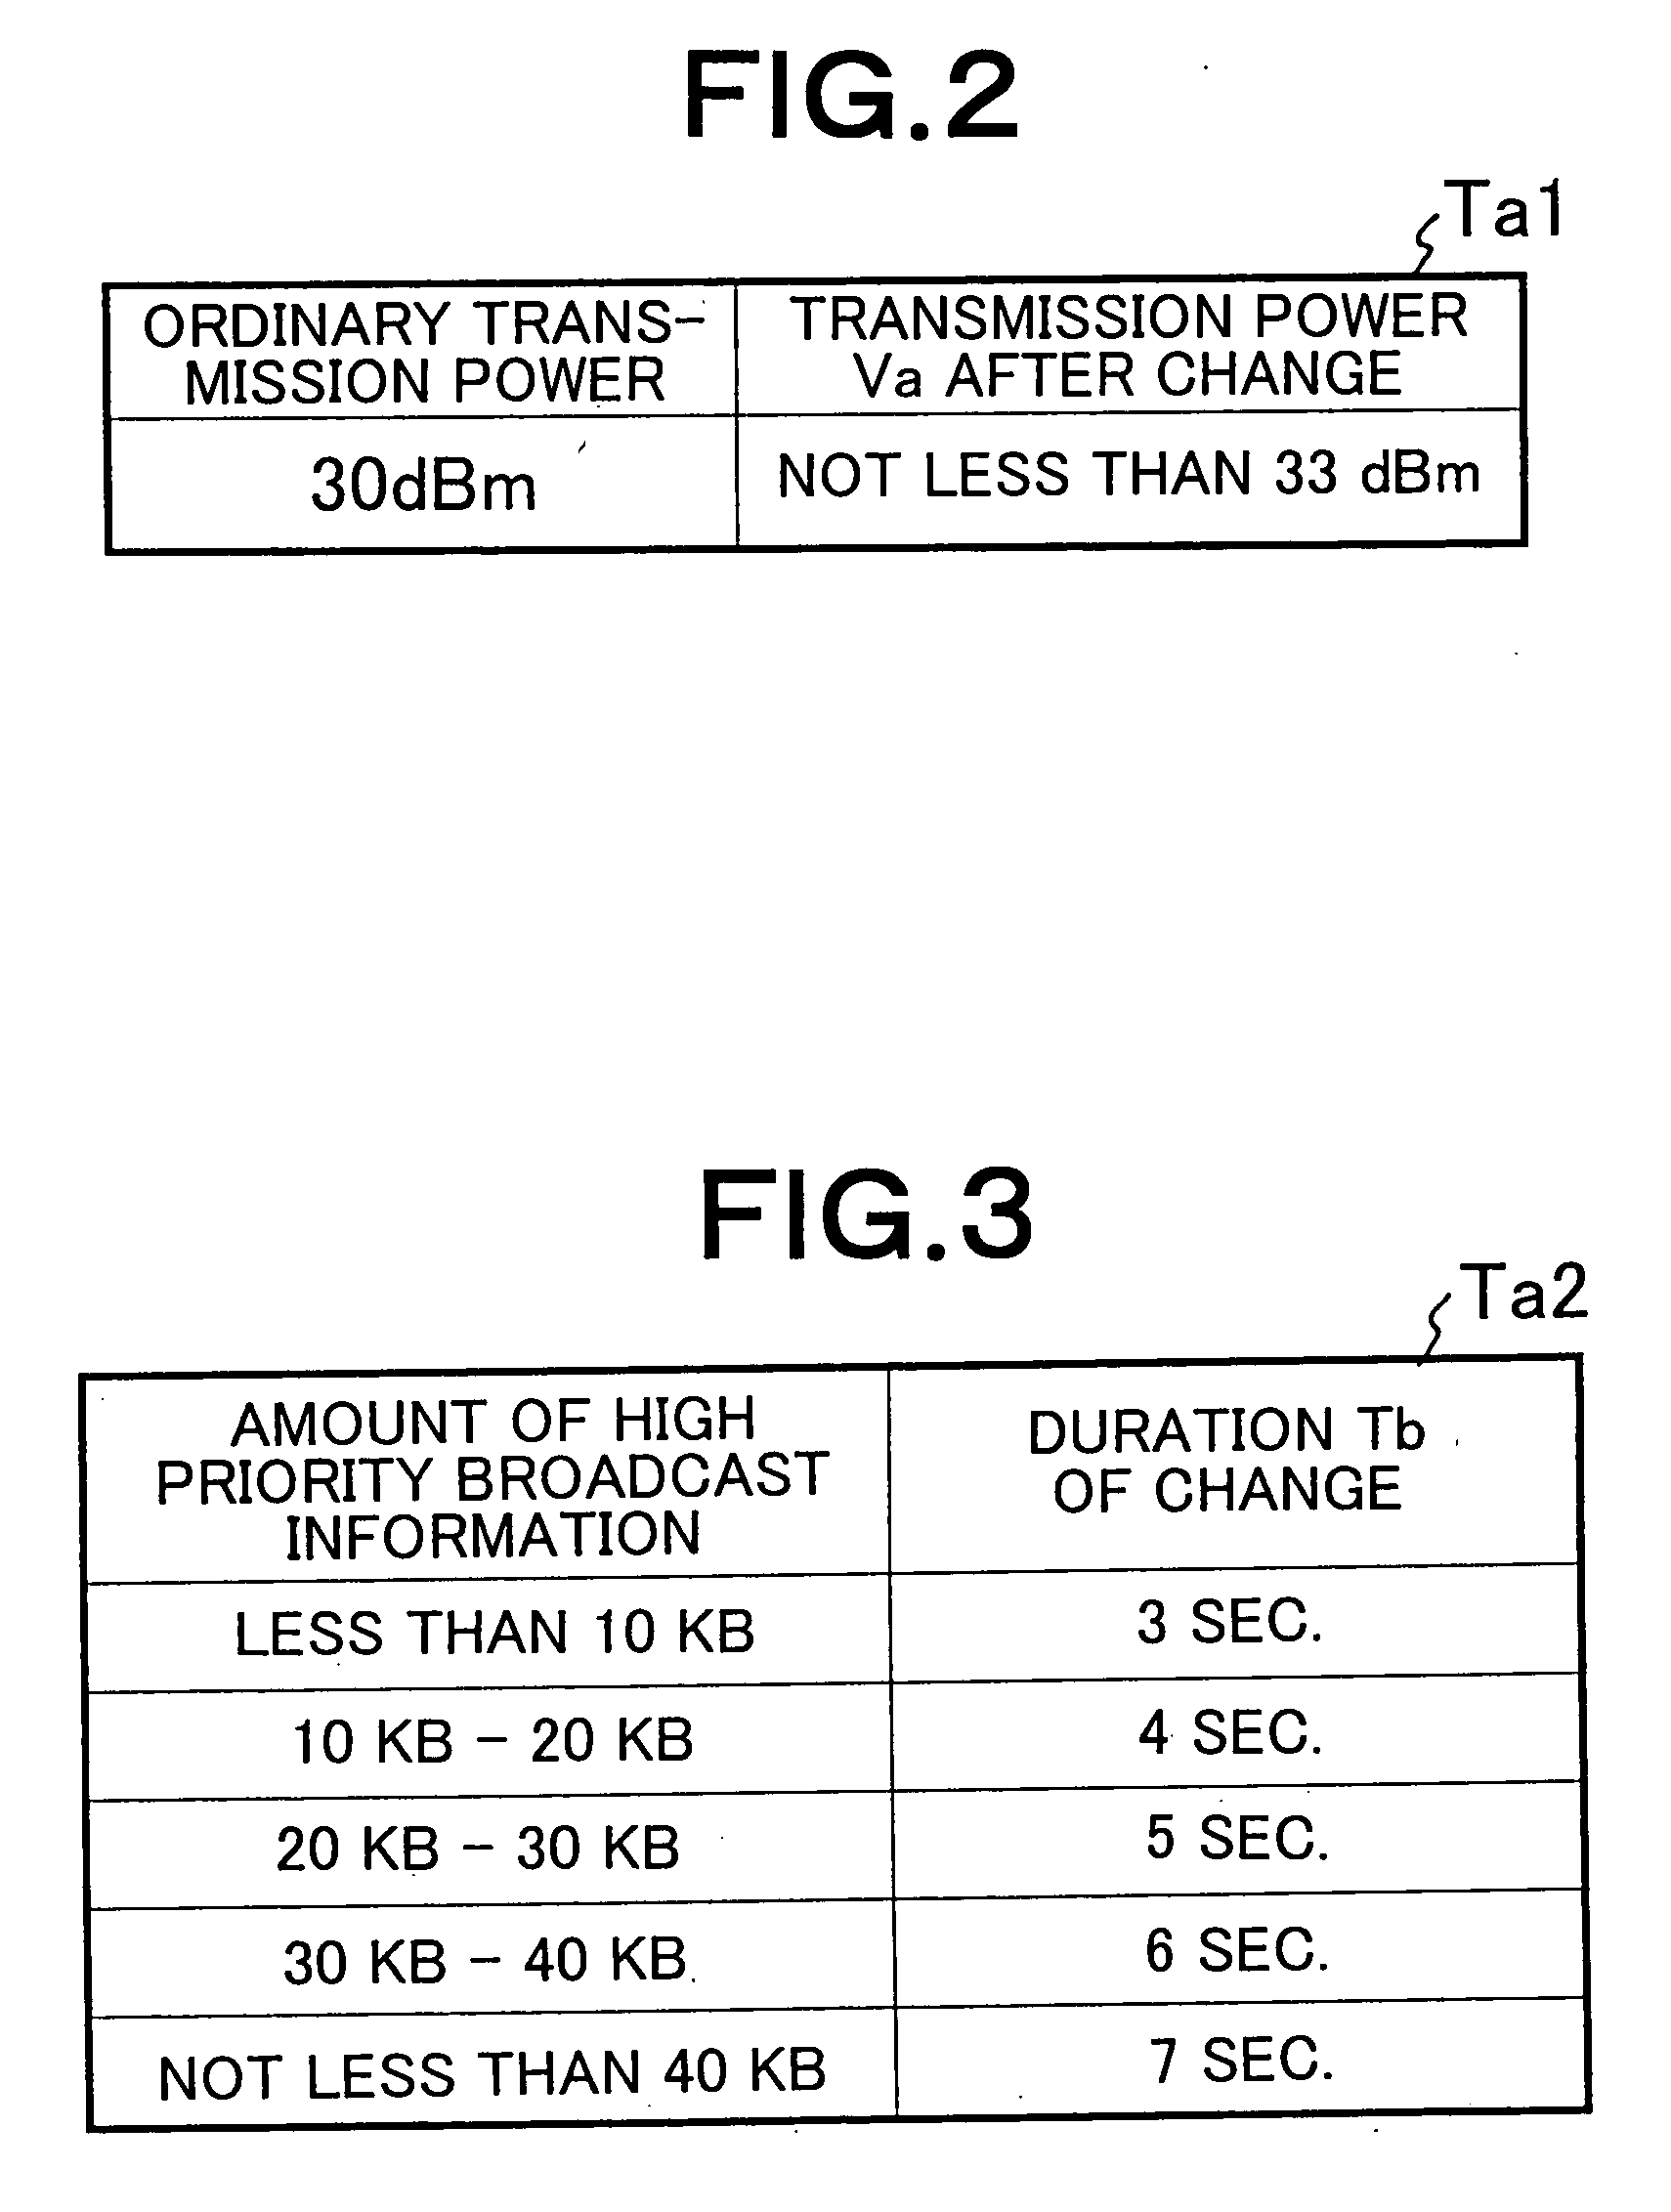 Wireless communication network and method for broadcasting high priority information using downlink common channels